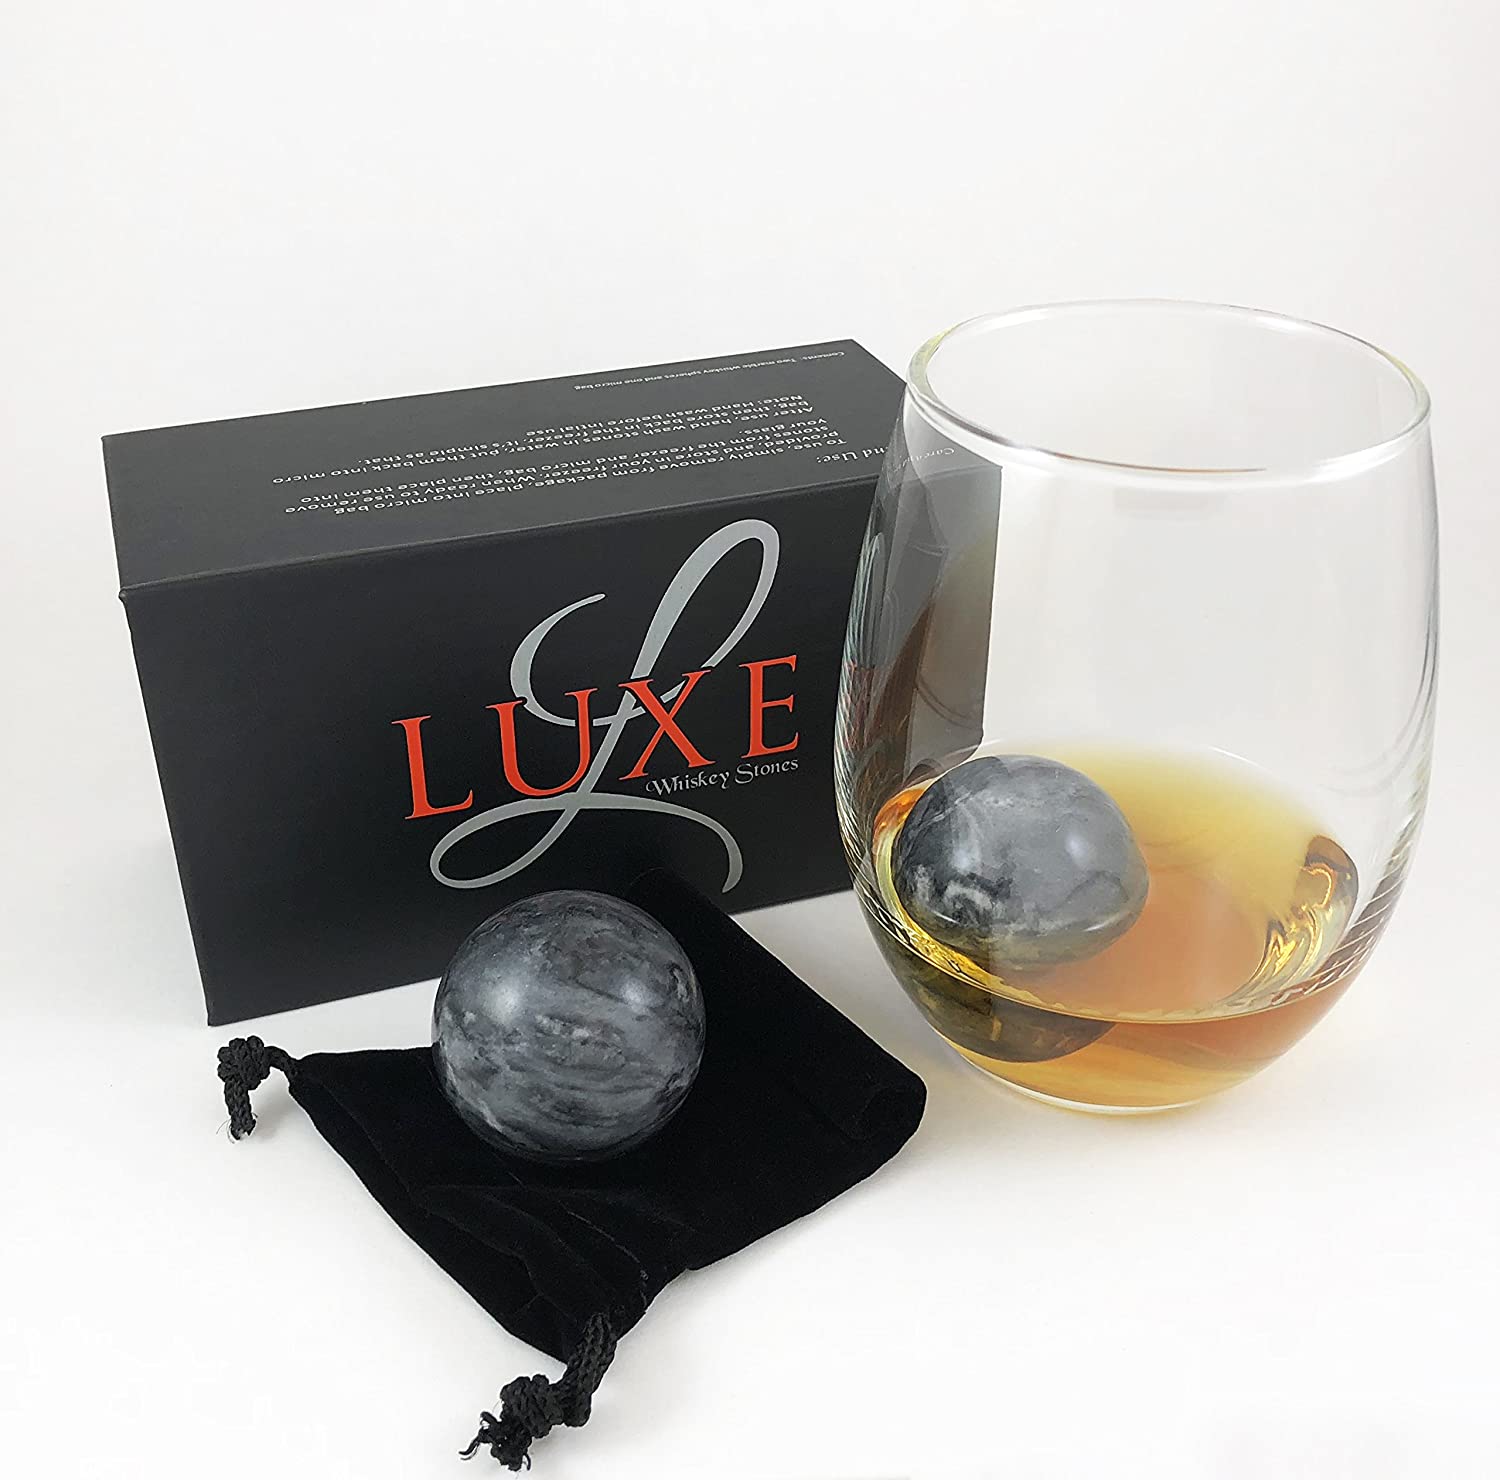 whiskey stone gift set Large Sphere Granite Whiskey Rocks for christmas gift Featured Image